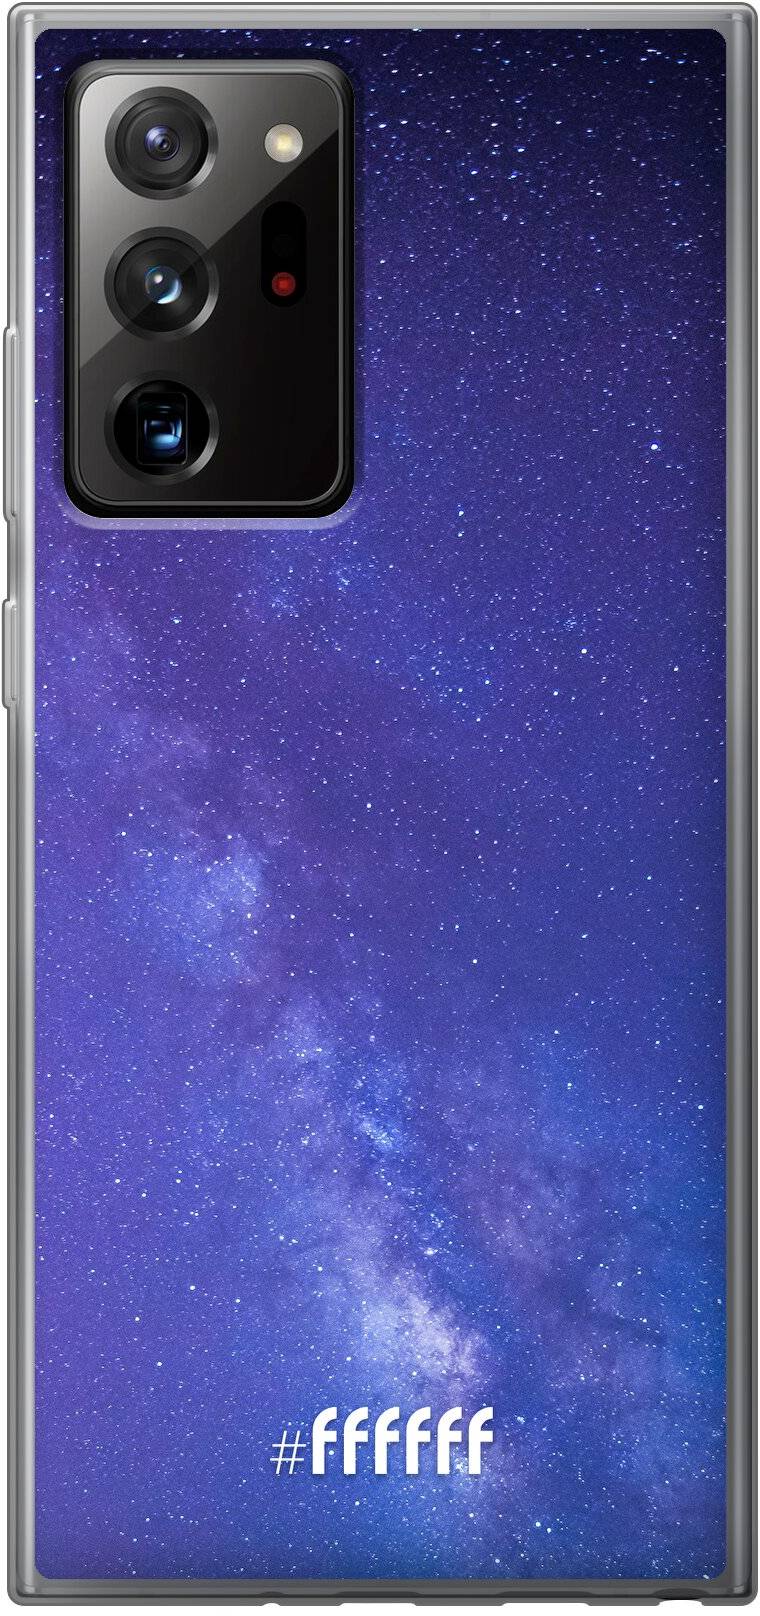 Star Cluster Galaxy Note 20 Ultra